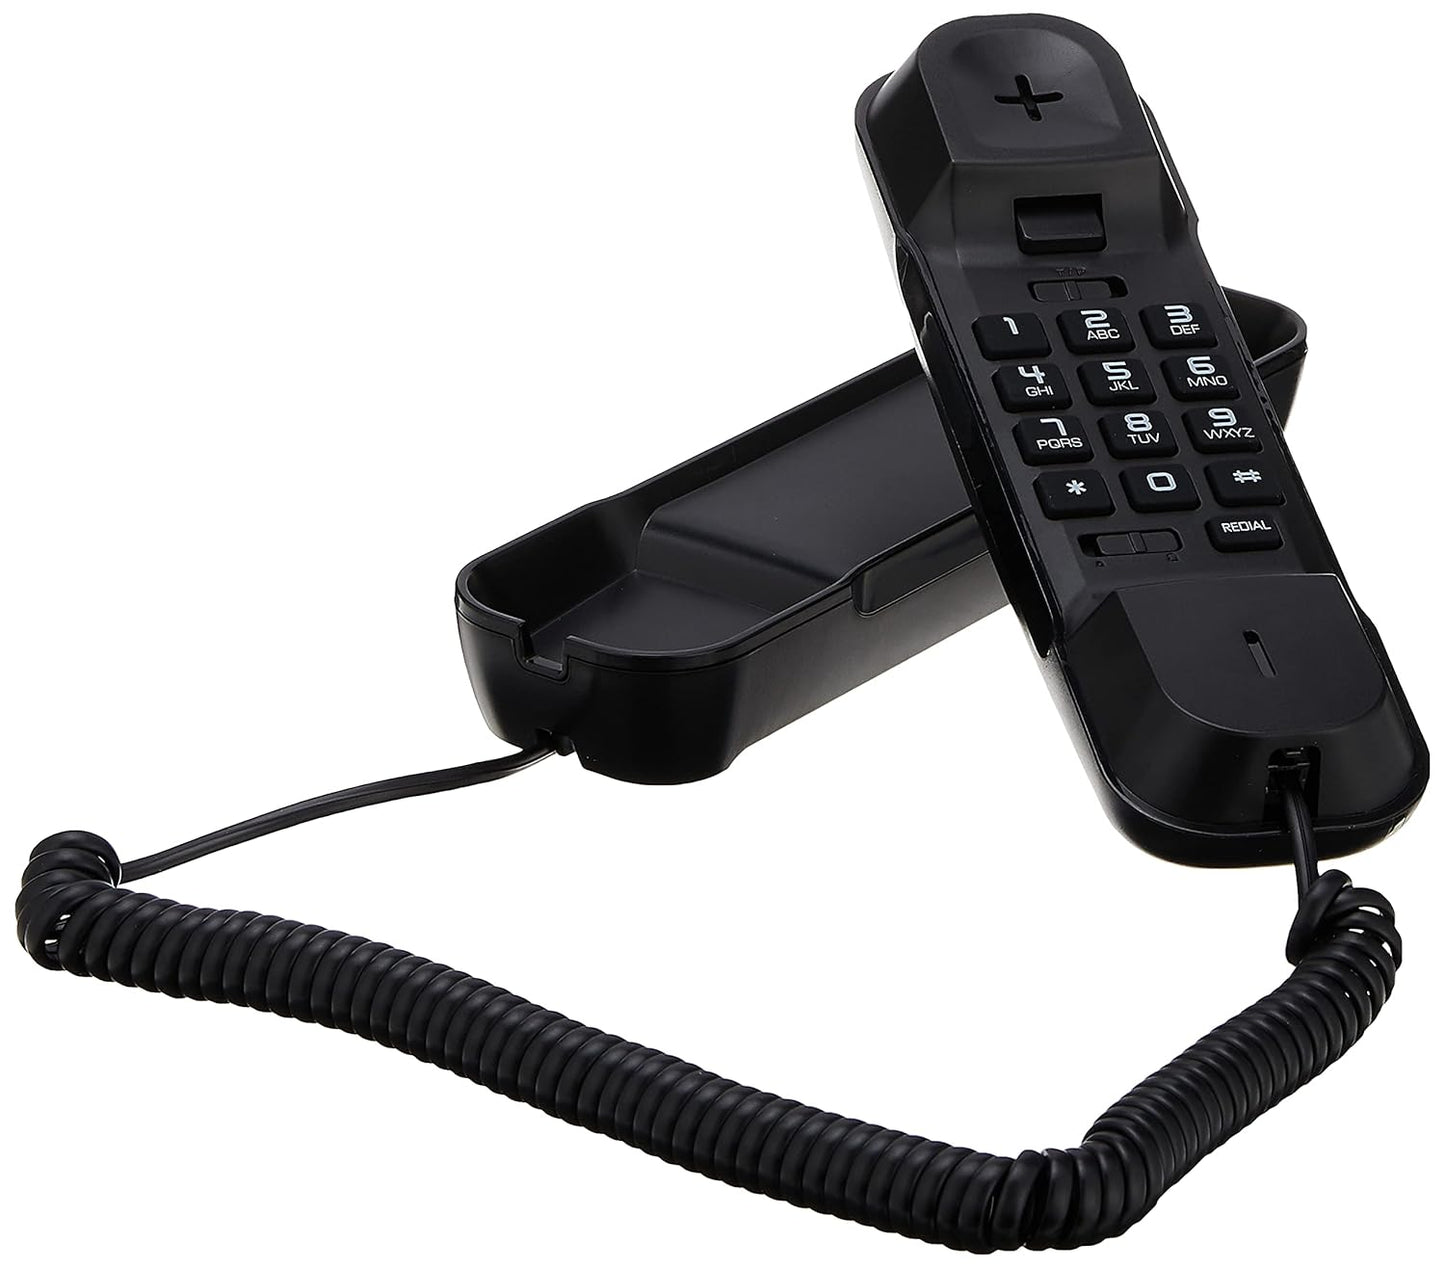 Alcatel T06 Ultra Compact Wall Mount Corded Landline Phone Black (Pack Of 2)